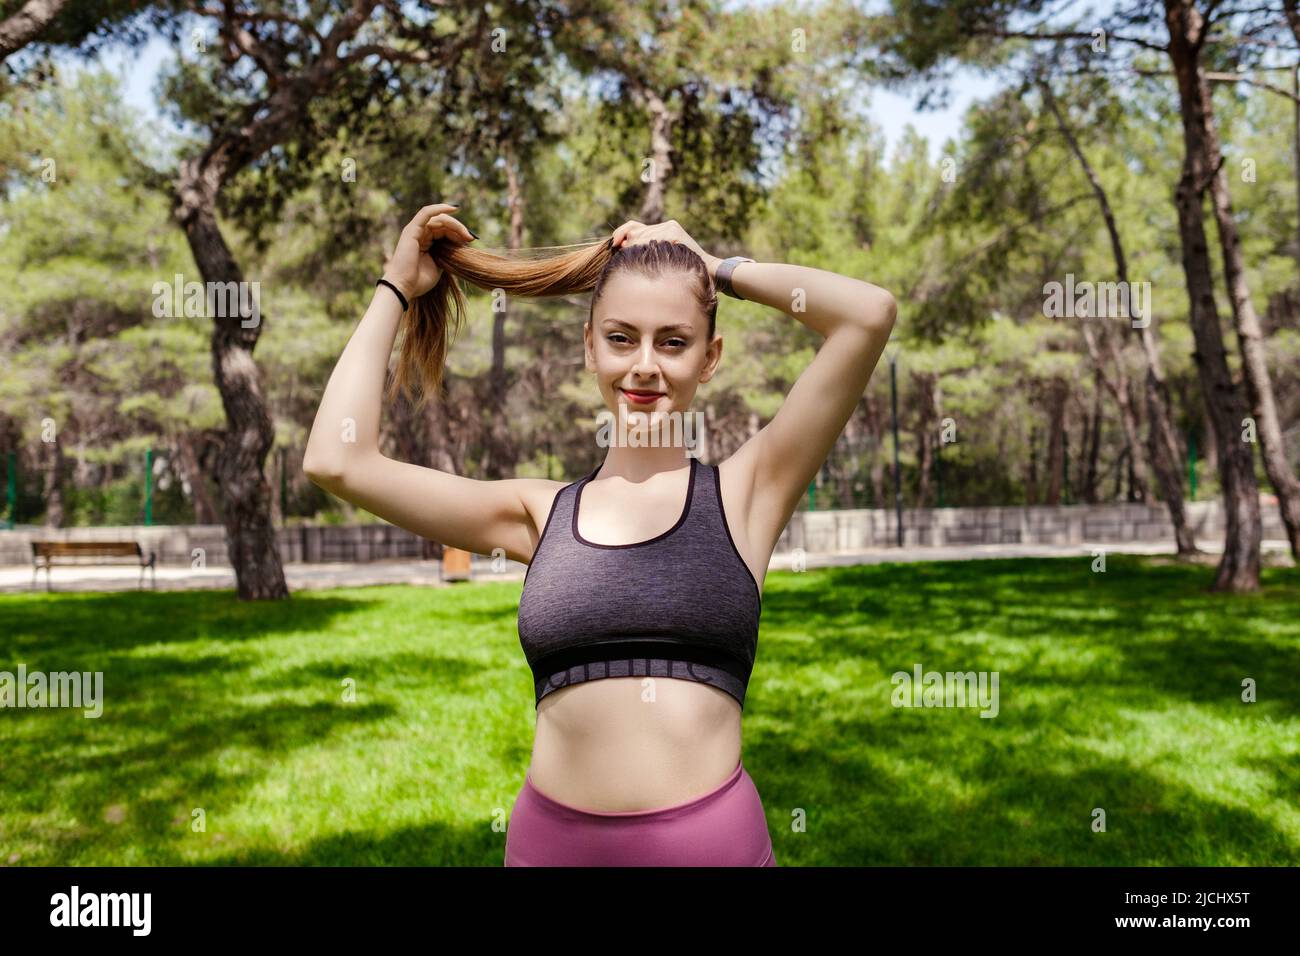 Happy brunette woman wearing black sports bra standing on city park, outdoors tying her hair in a ponytail while looking at the camera. Stock Photo